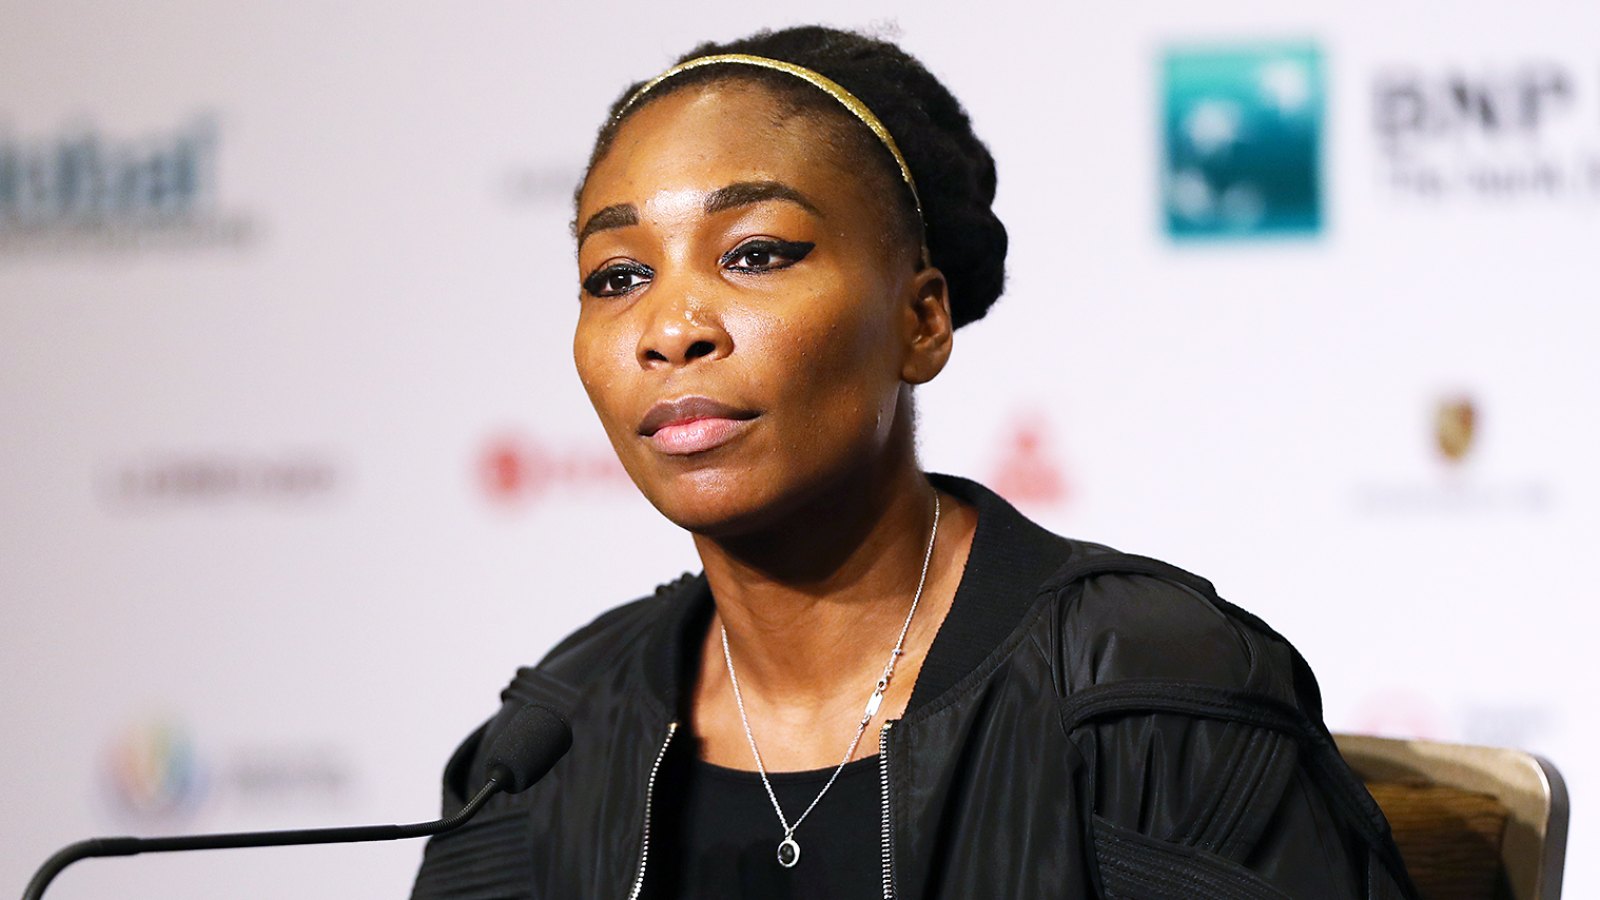 Venus Williams Will Not Face Charges in Fatal Car Accident